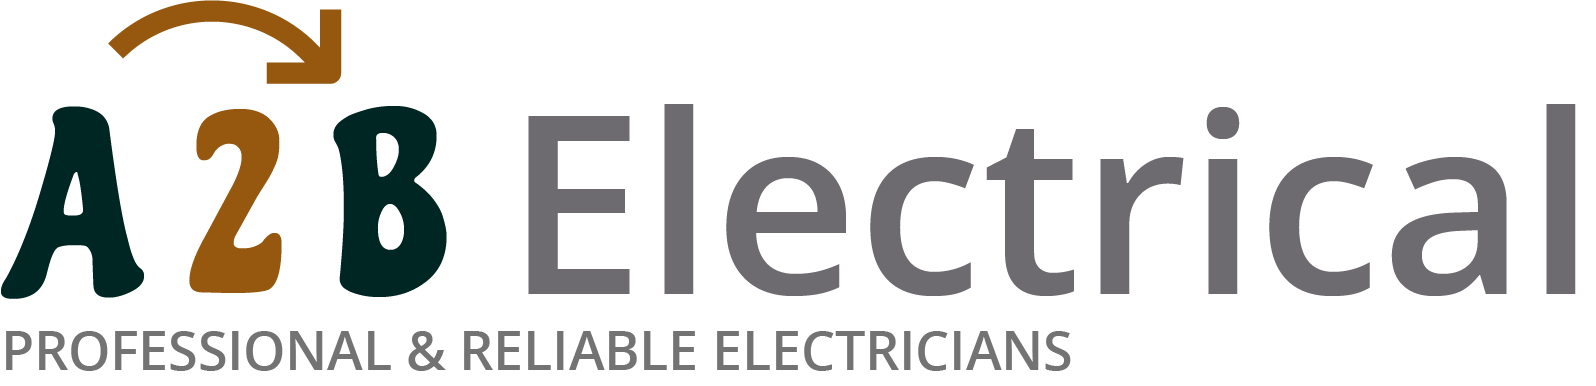 If you have electrical wiring problems in Truro, we can provide an electrician to have a look for you. 